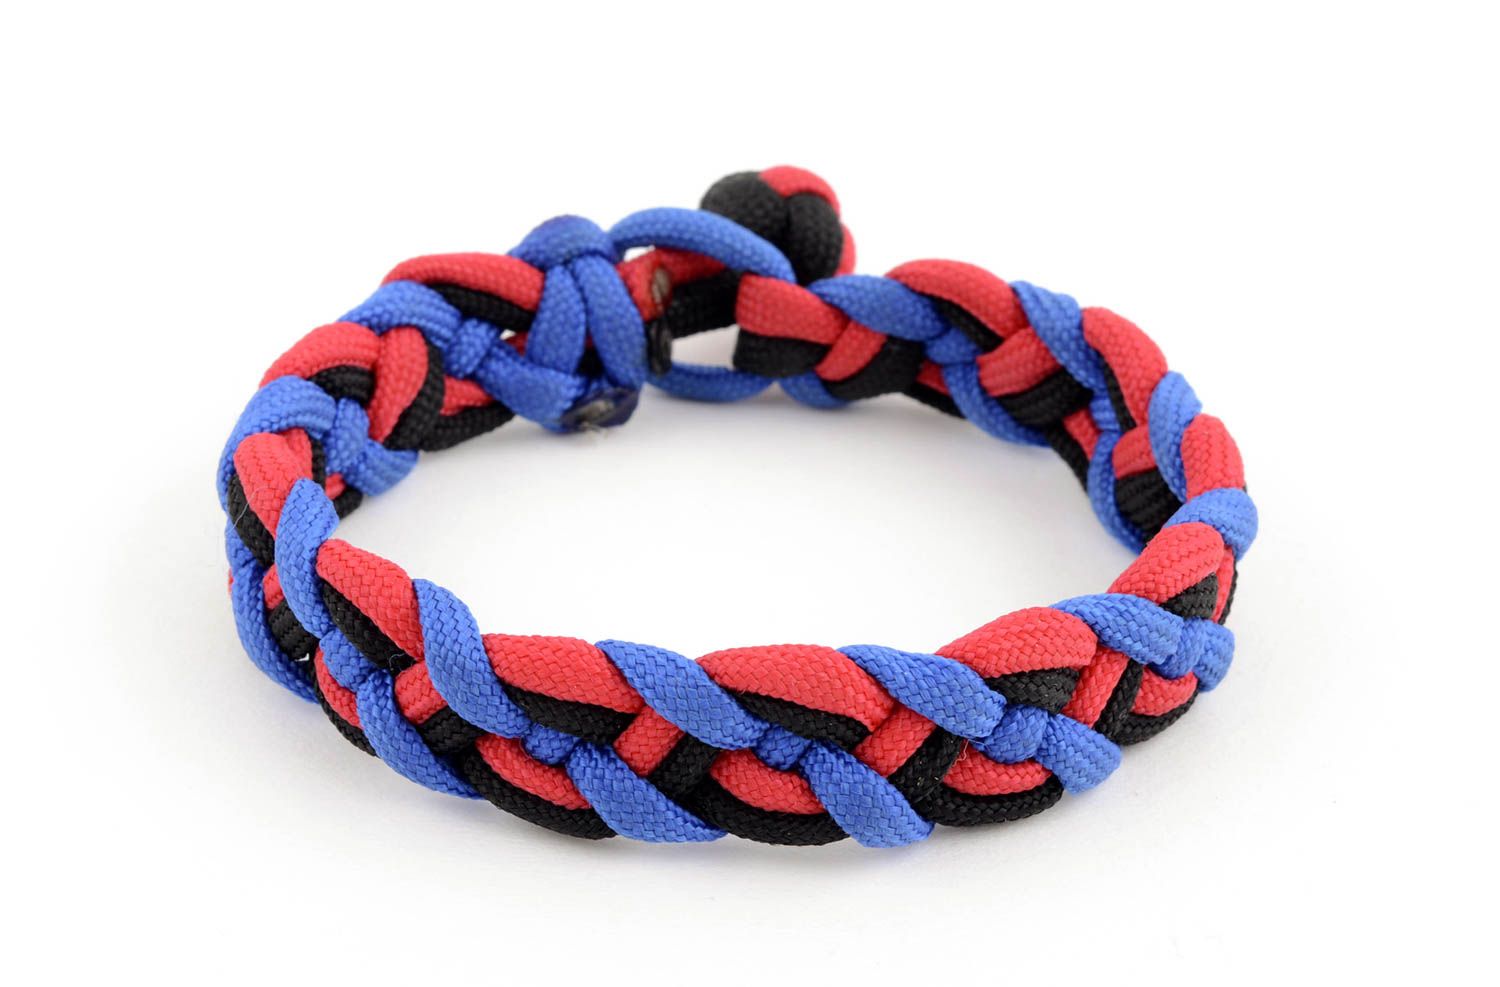 where to buy paracord bracelet supplies